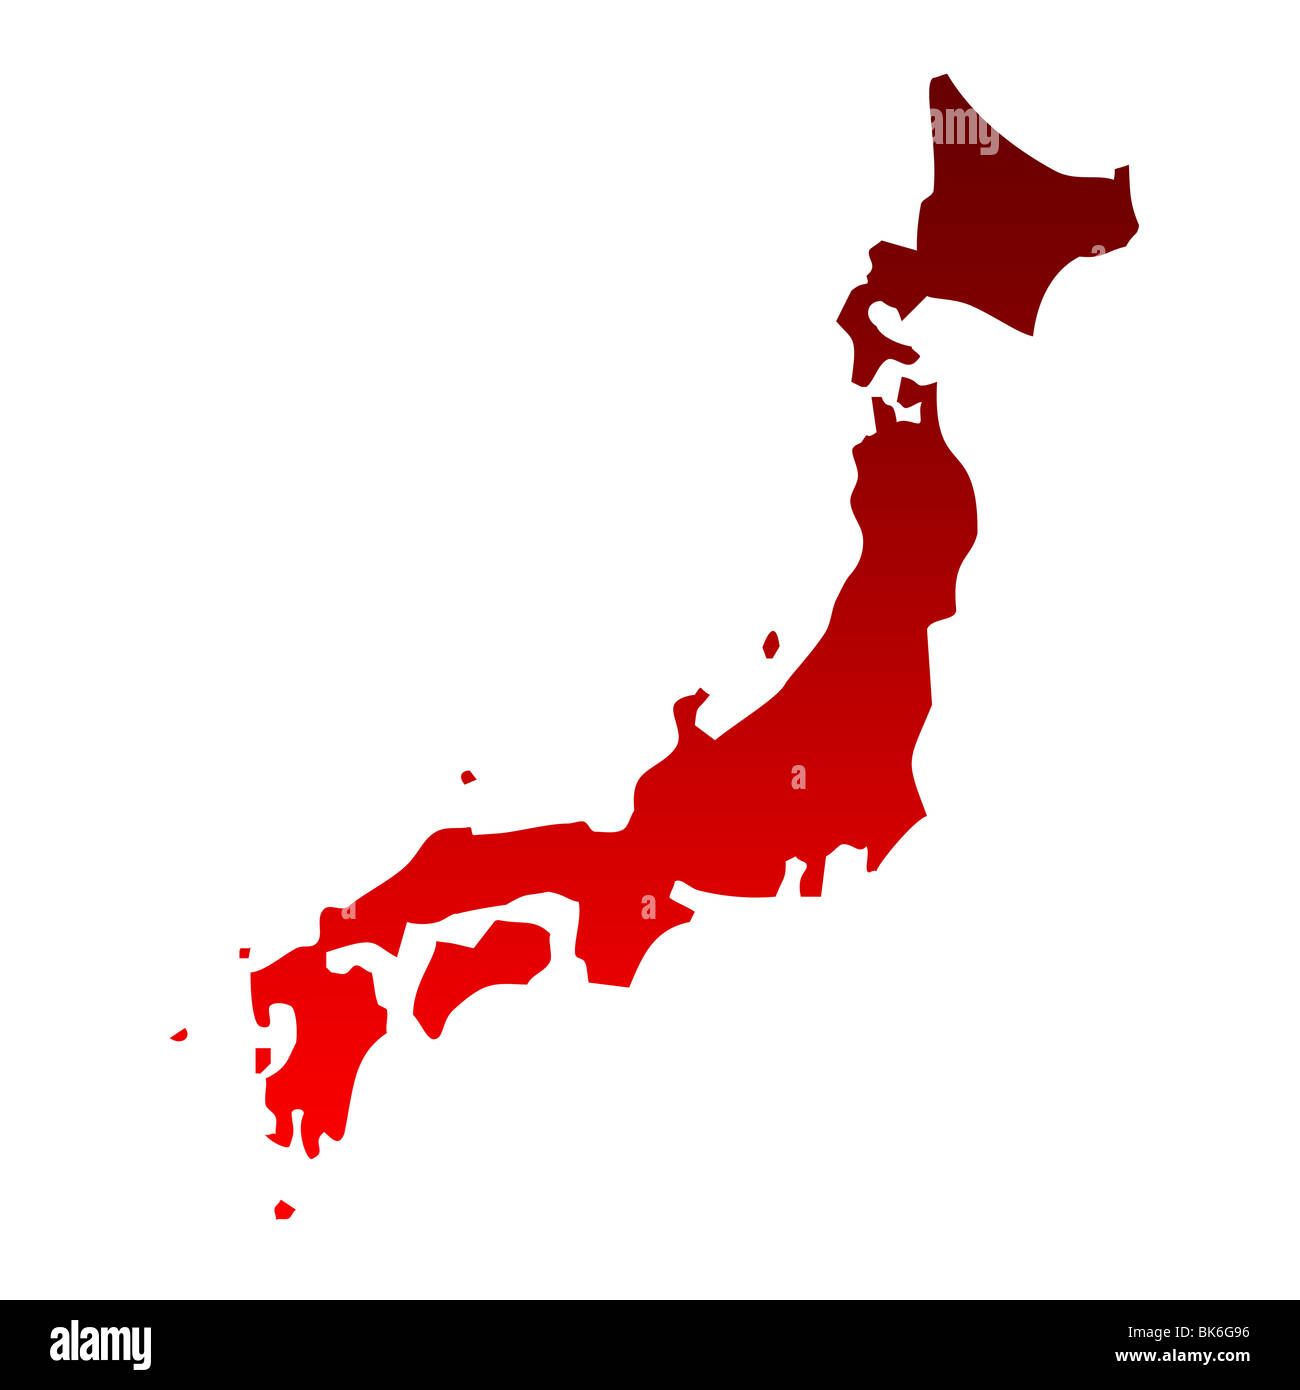 Map of Japan in gradient red isolated on white background. Stock Photo